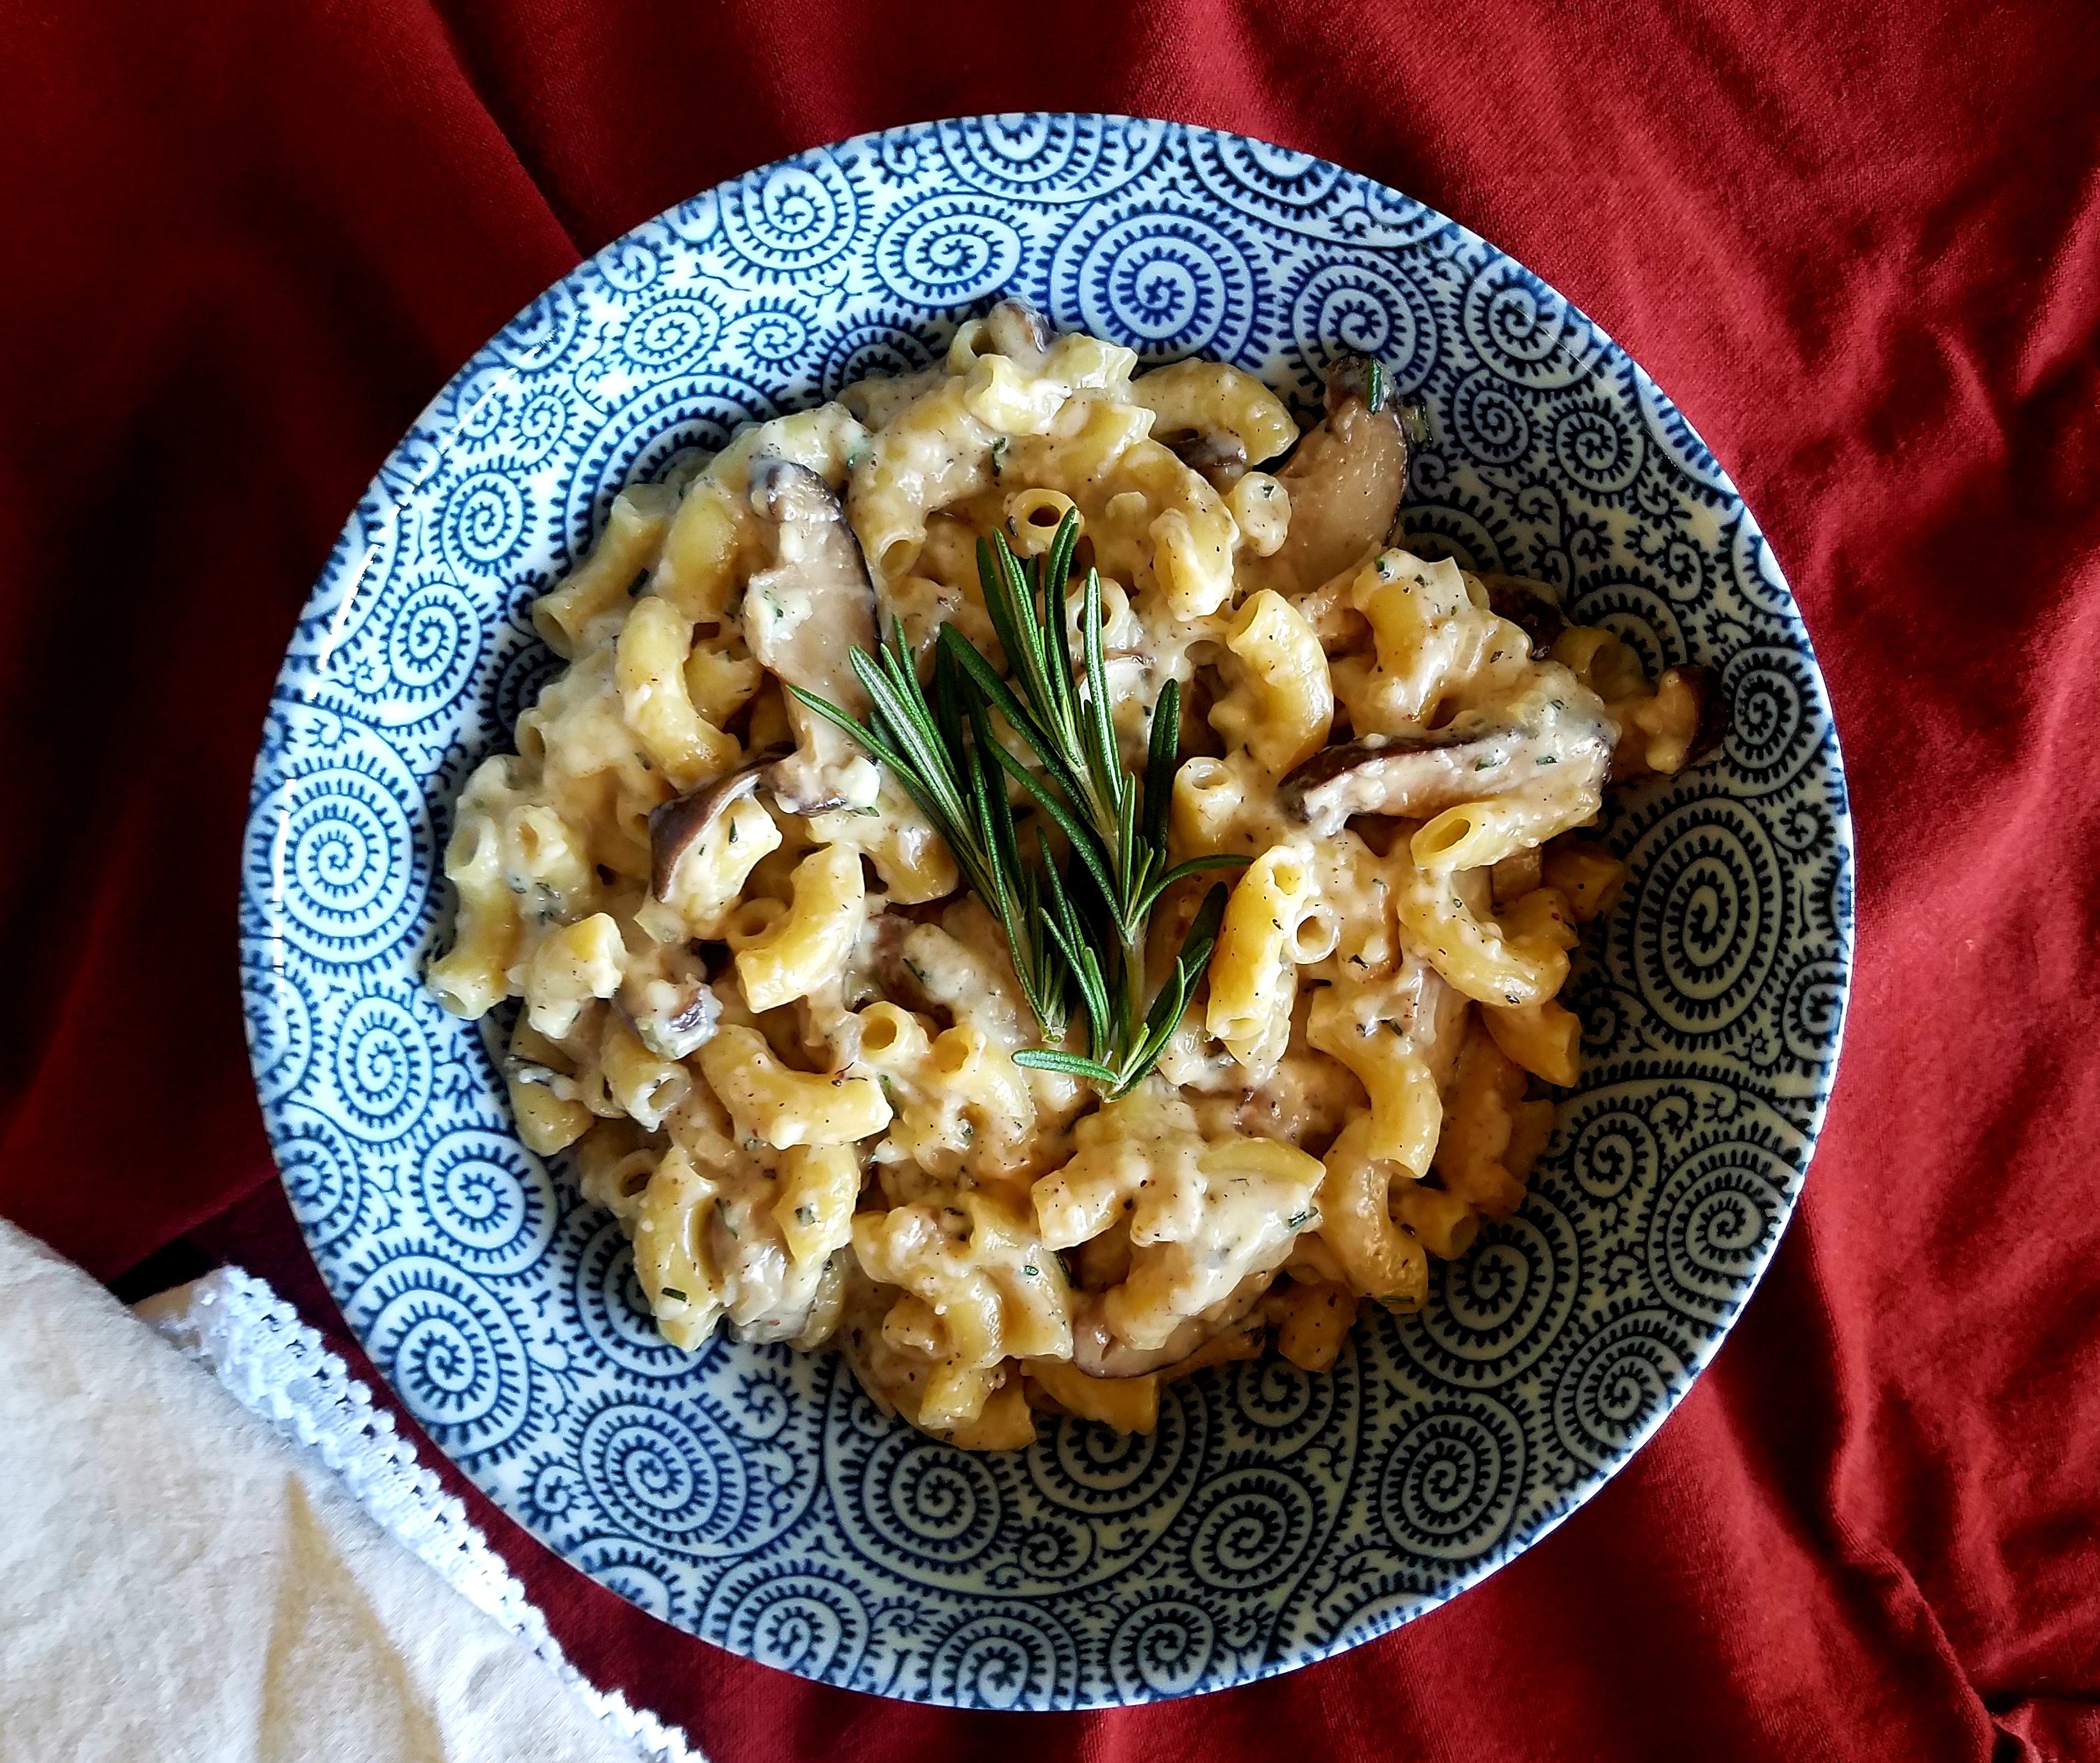 Mushroom Brie Mac and Cheese (Recipe inspired by NO ONE TELLS YOU THIS)